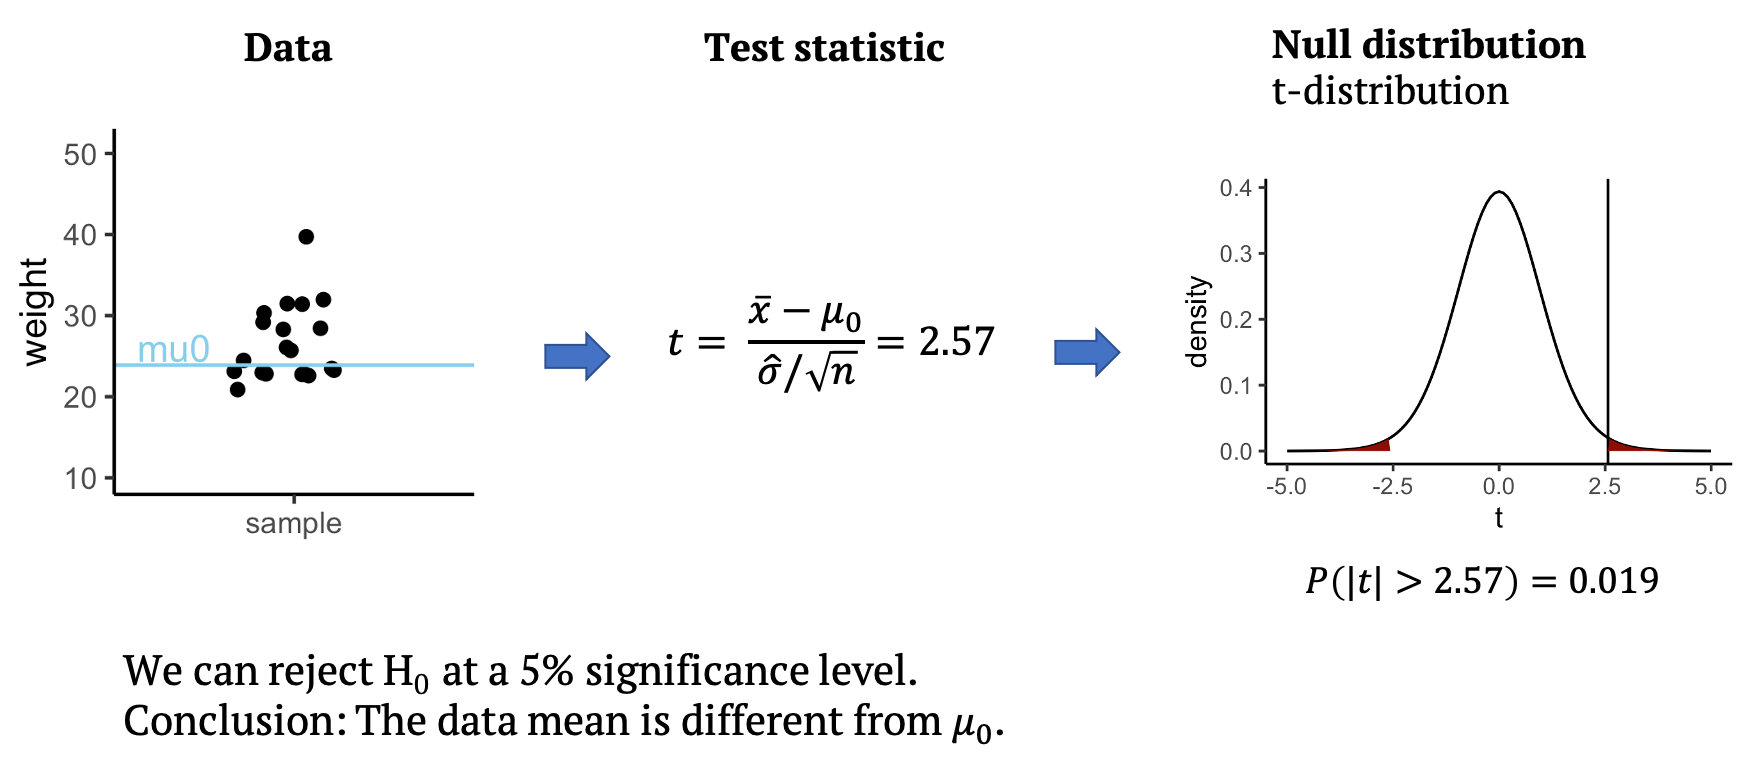 Schema for performing a one-sample t-test